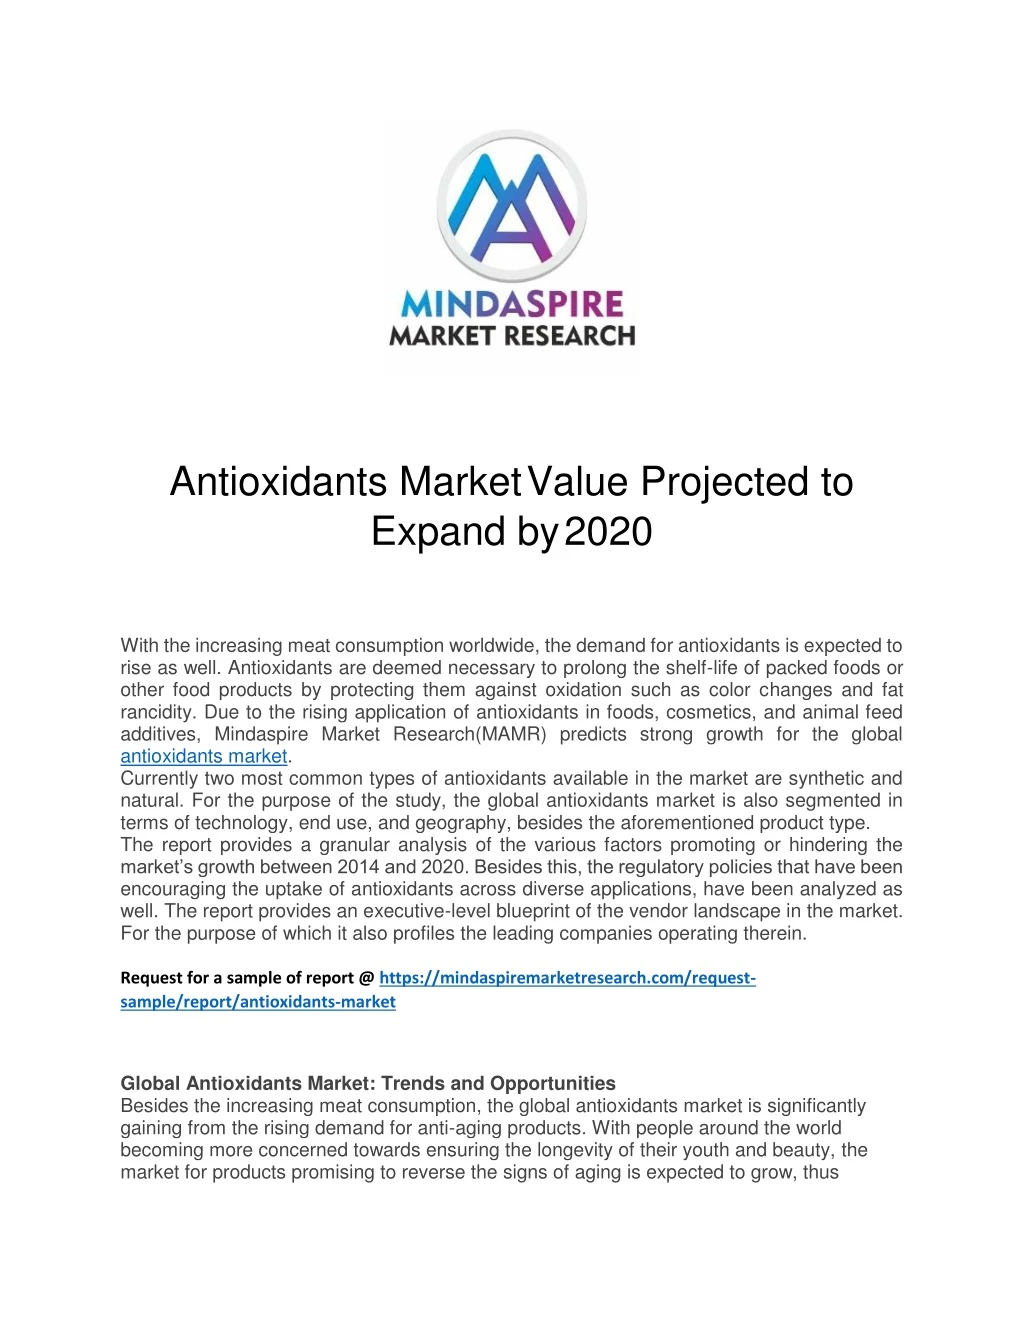 antioxidants market value projected to expand